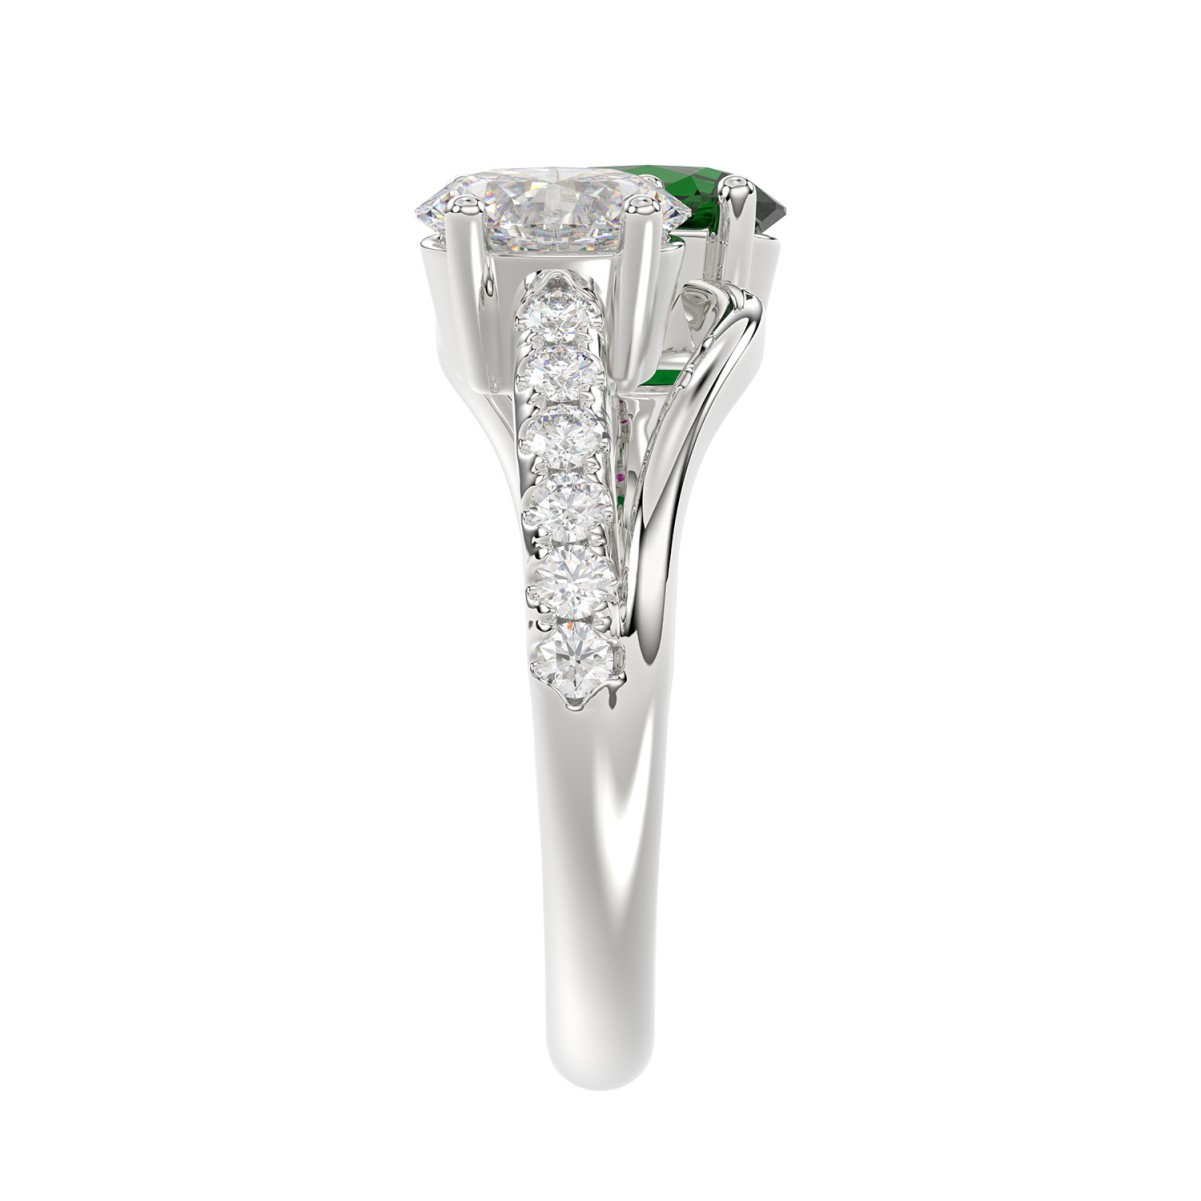 18K WHITE GOLD 7/8CT OVAL GREEN EMERALD / ROUND DIAMOND LADIES RING(COLOR STONE OVAL GREEN EMERALD DIAMOND 1/3CT)